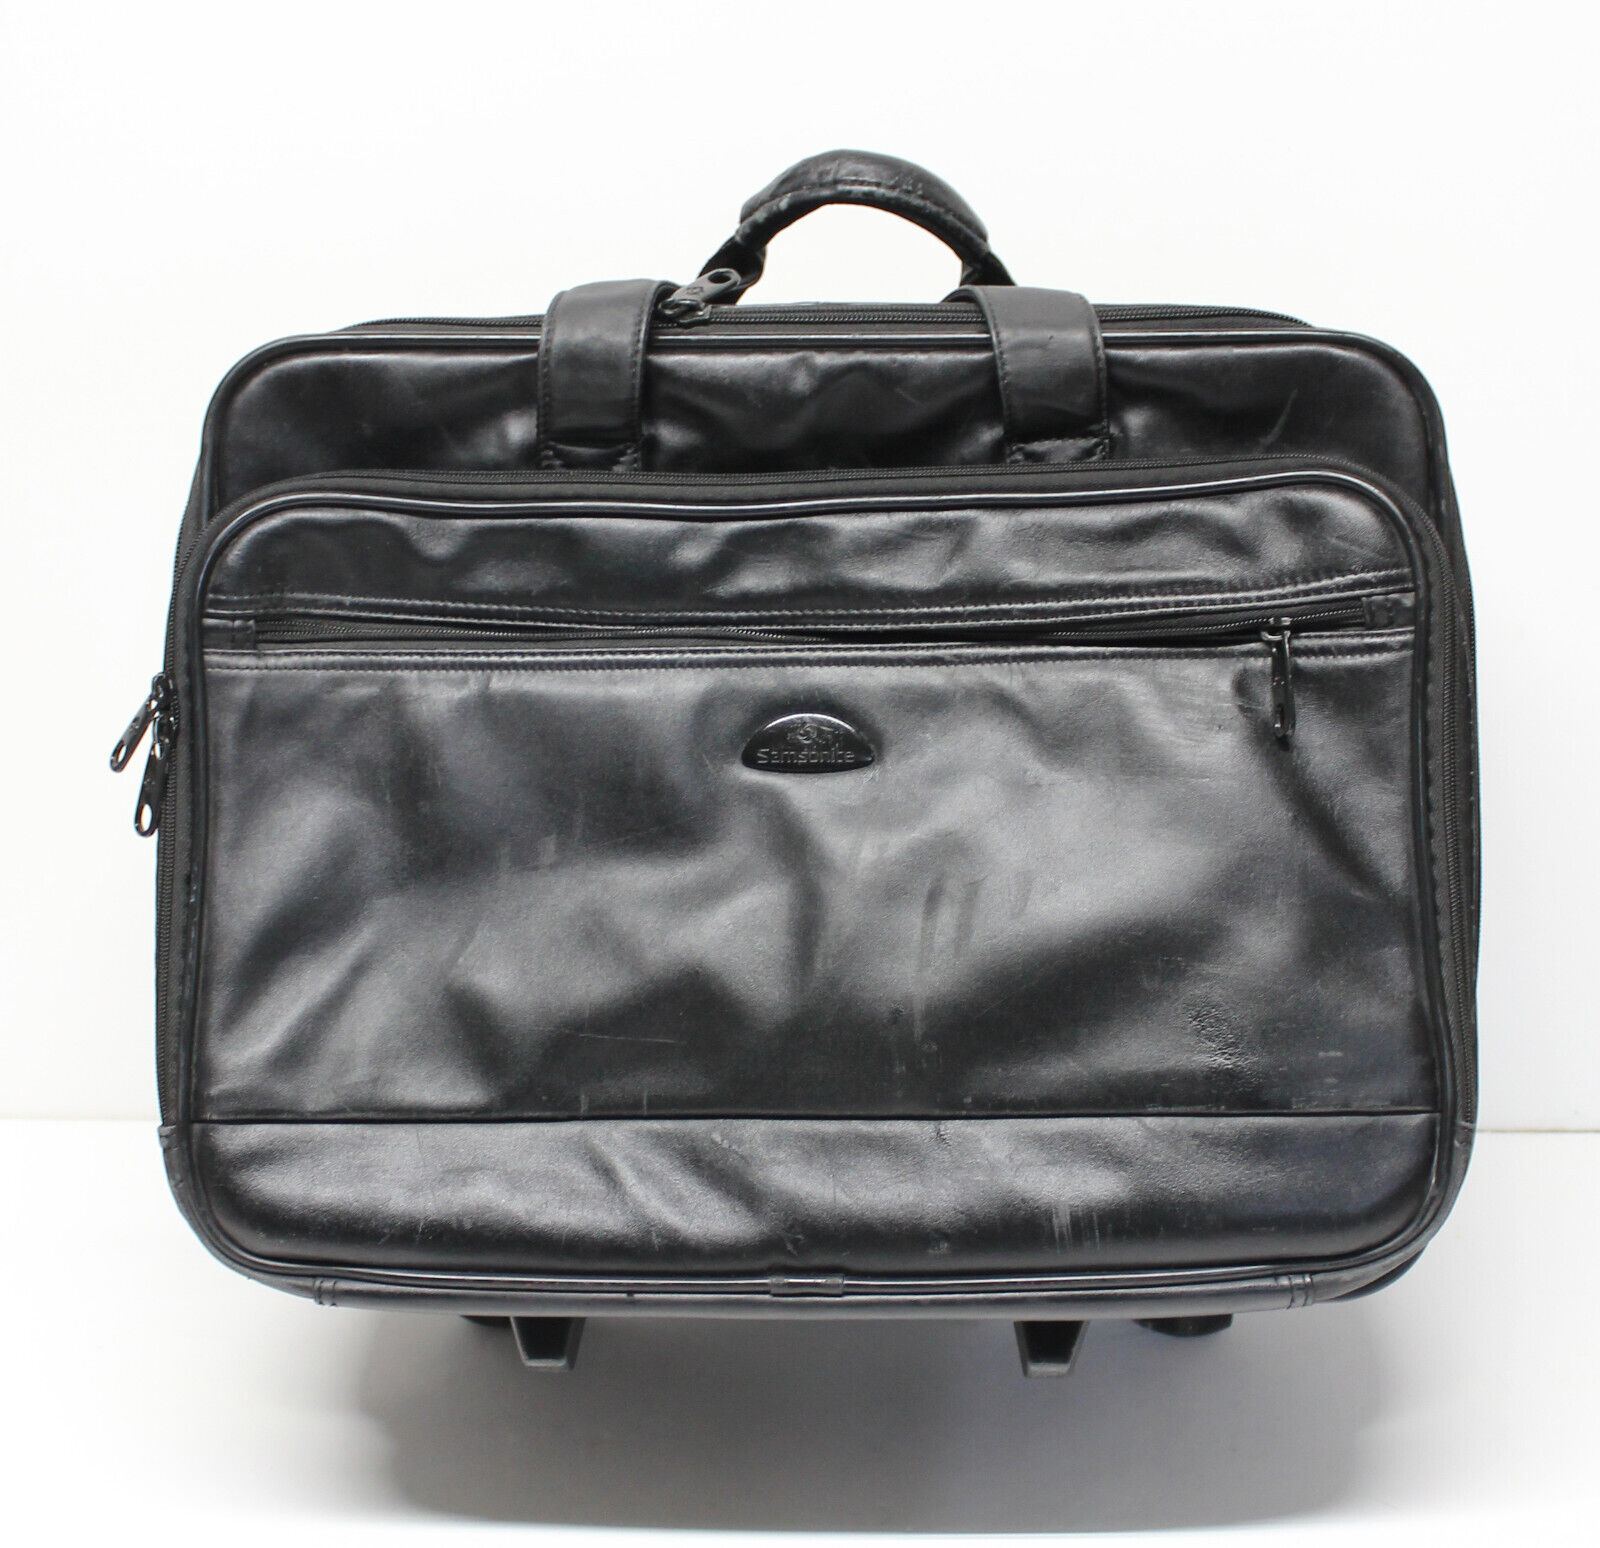 Samsonite Rolling Laptop Briefcase Bag Carry On Style Black Leather Case